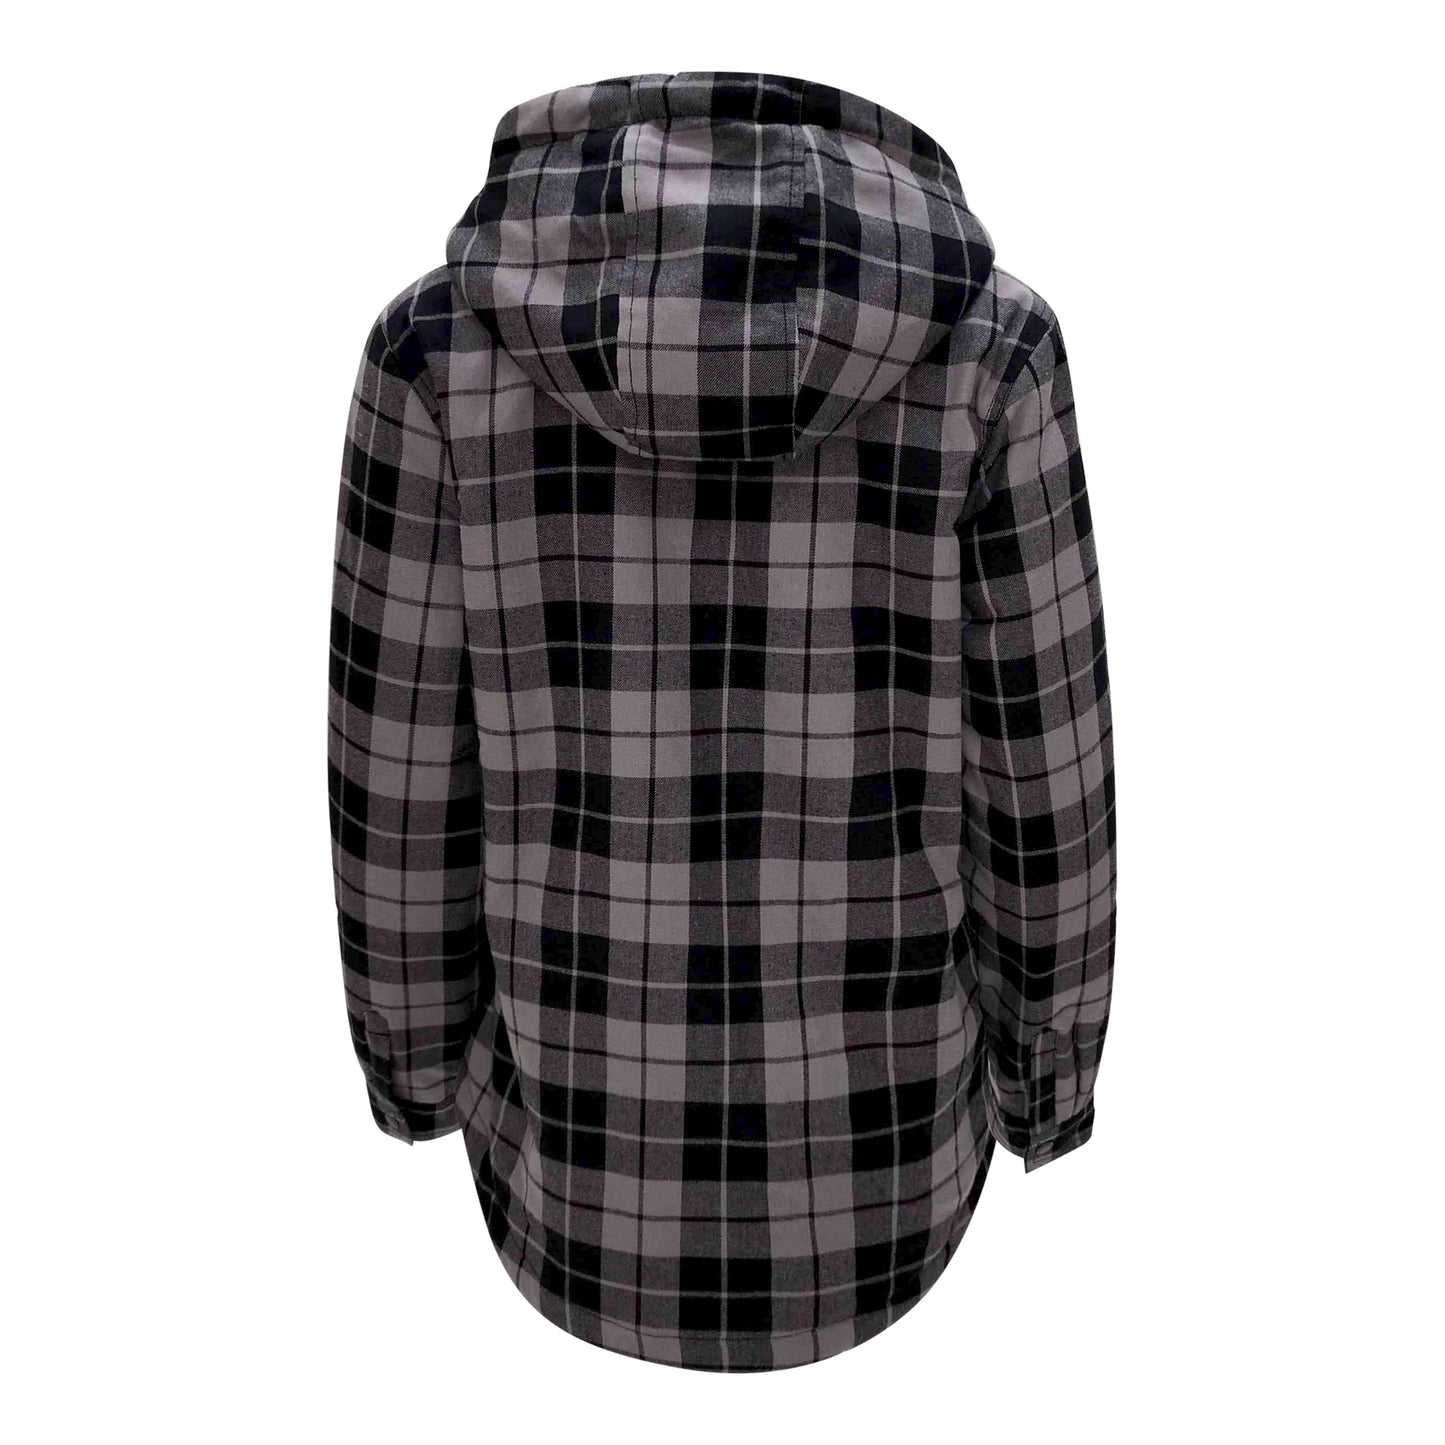 Women's Flannel Shirt with Sherpa Lining TK-95005L